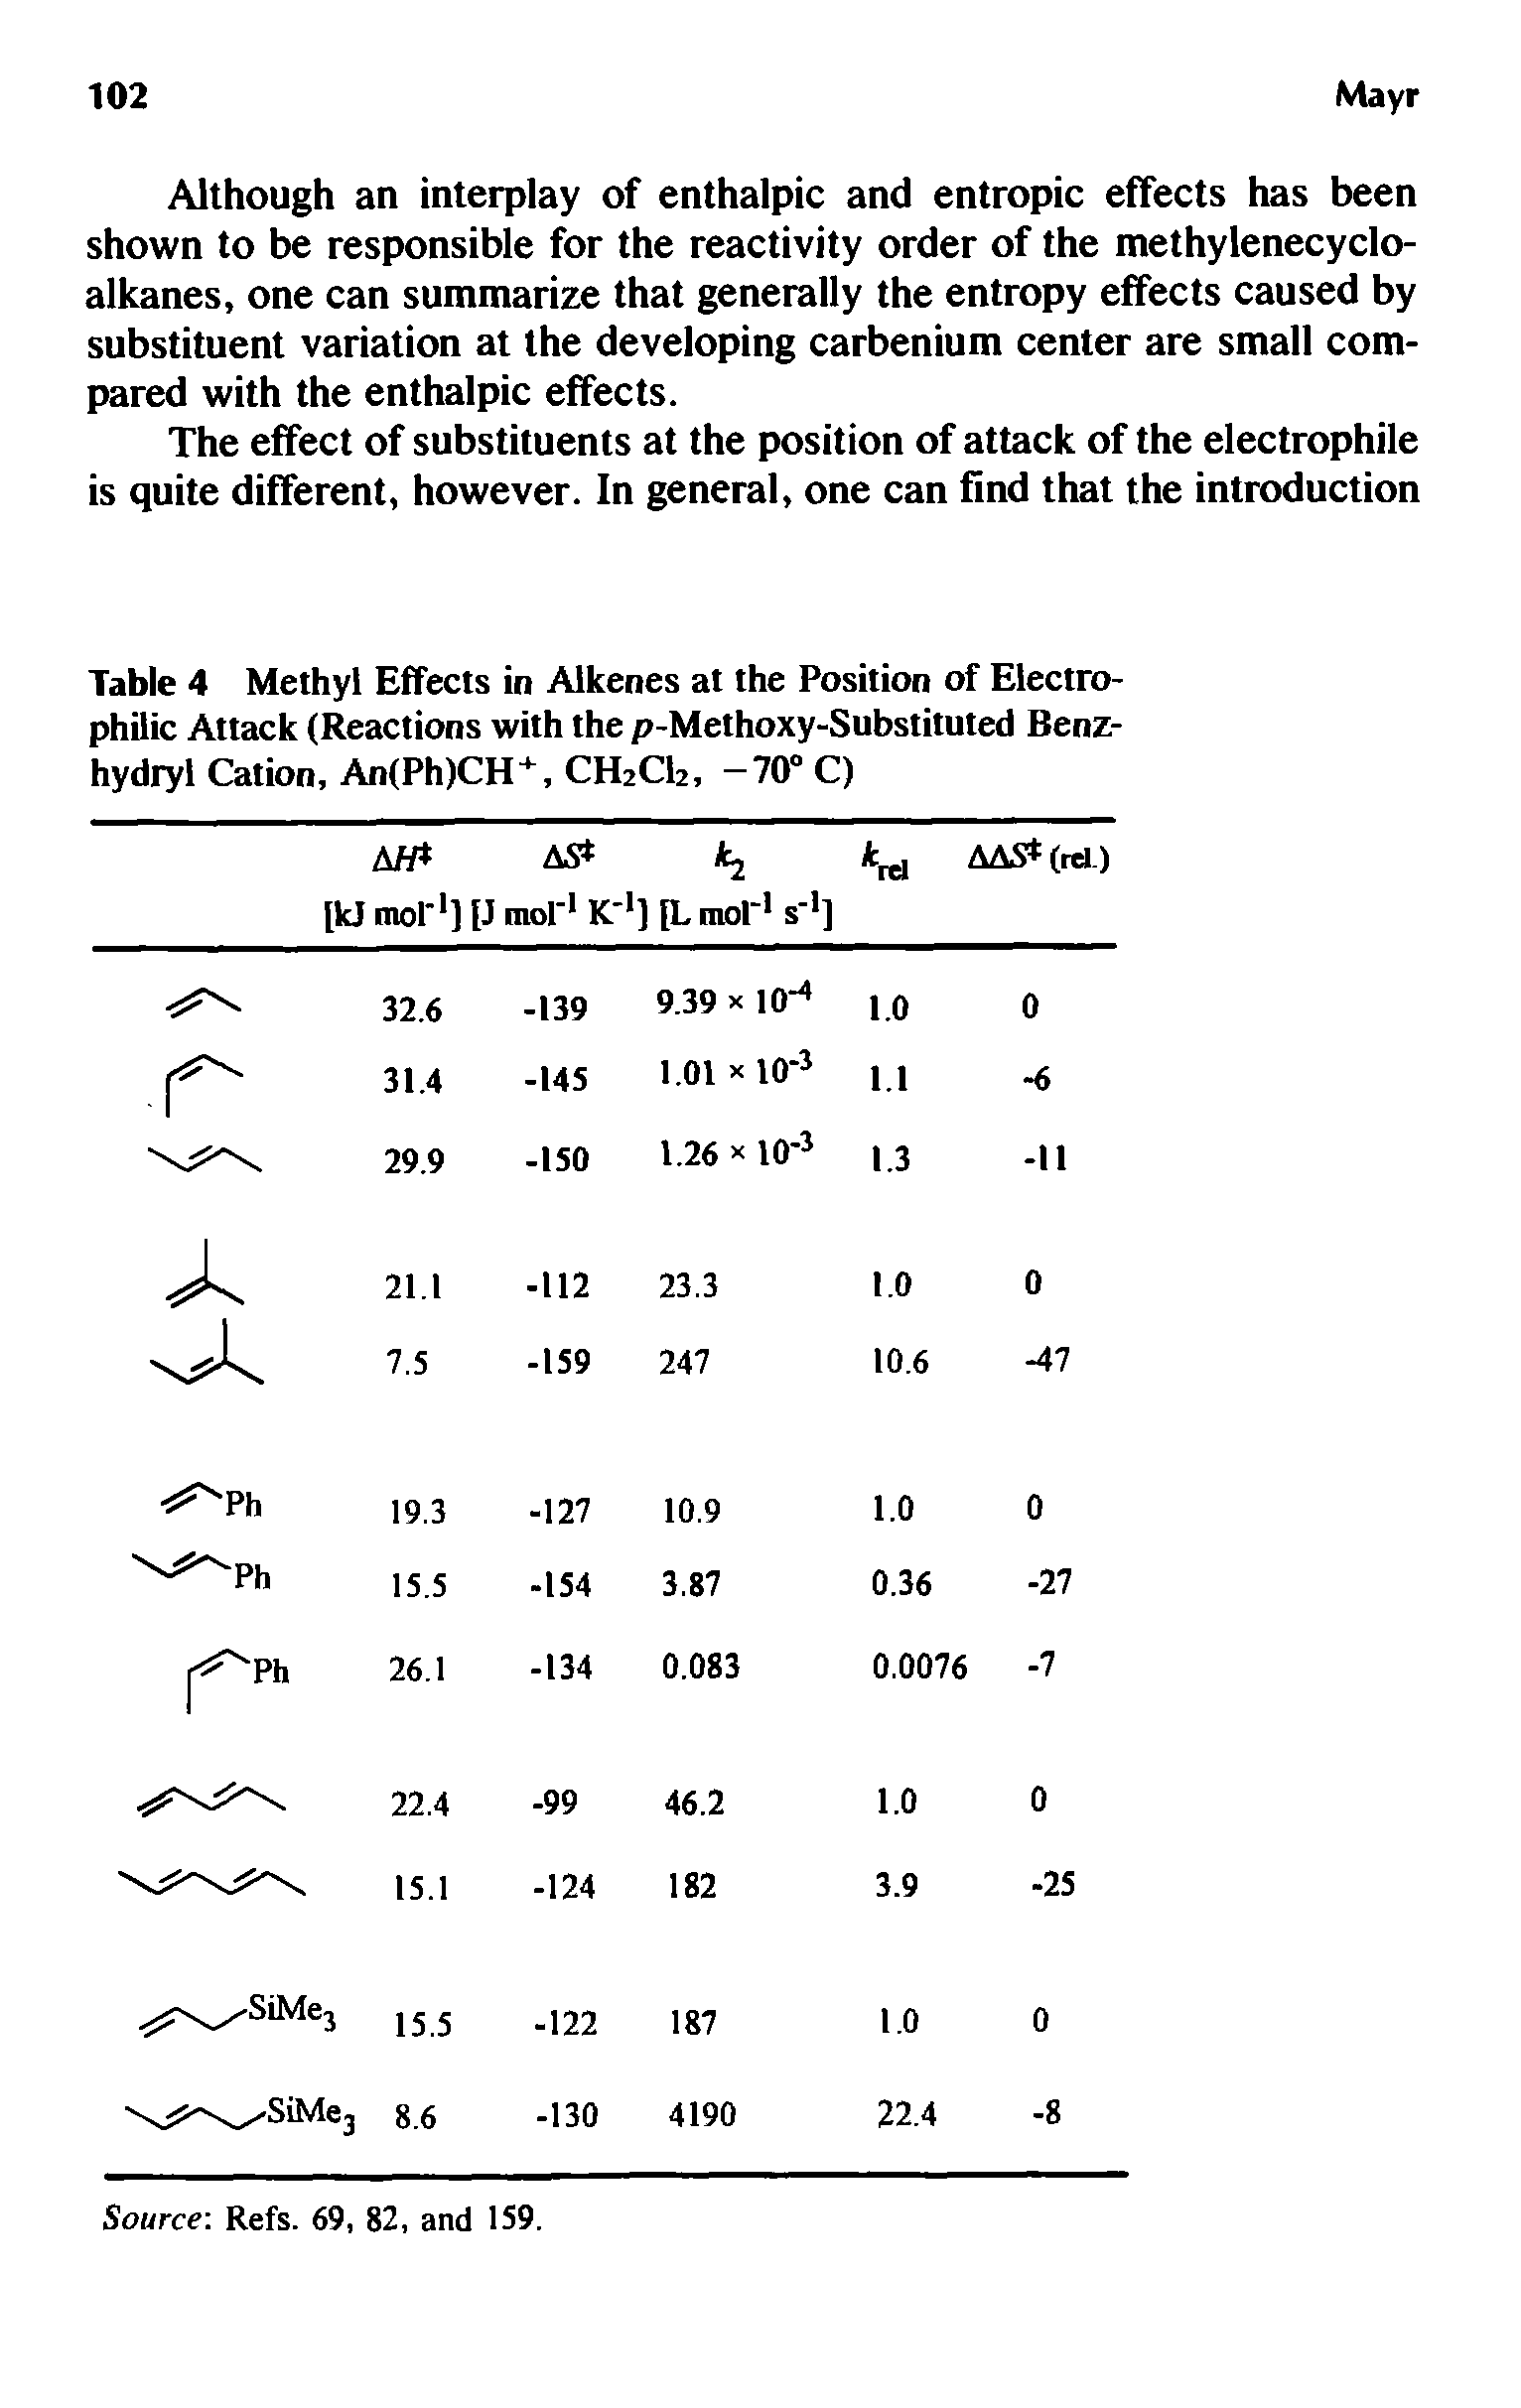 Table 4 Methyl Effects in Alkenes at the Position of Electrophilic Attack (Reactions with the p-Methoxy-Substituted Benz-hydryl Cation, An(Ph)CH+, CH2C12, -70° C)...